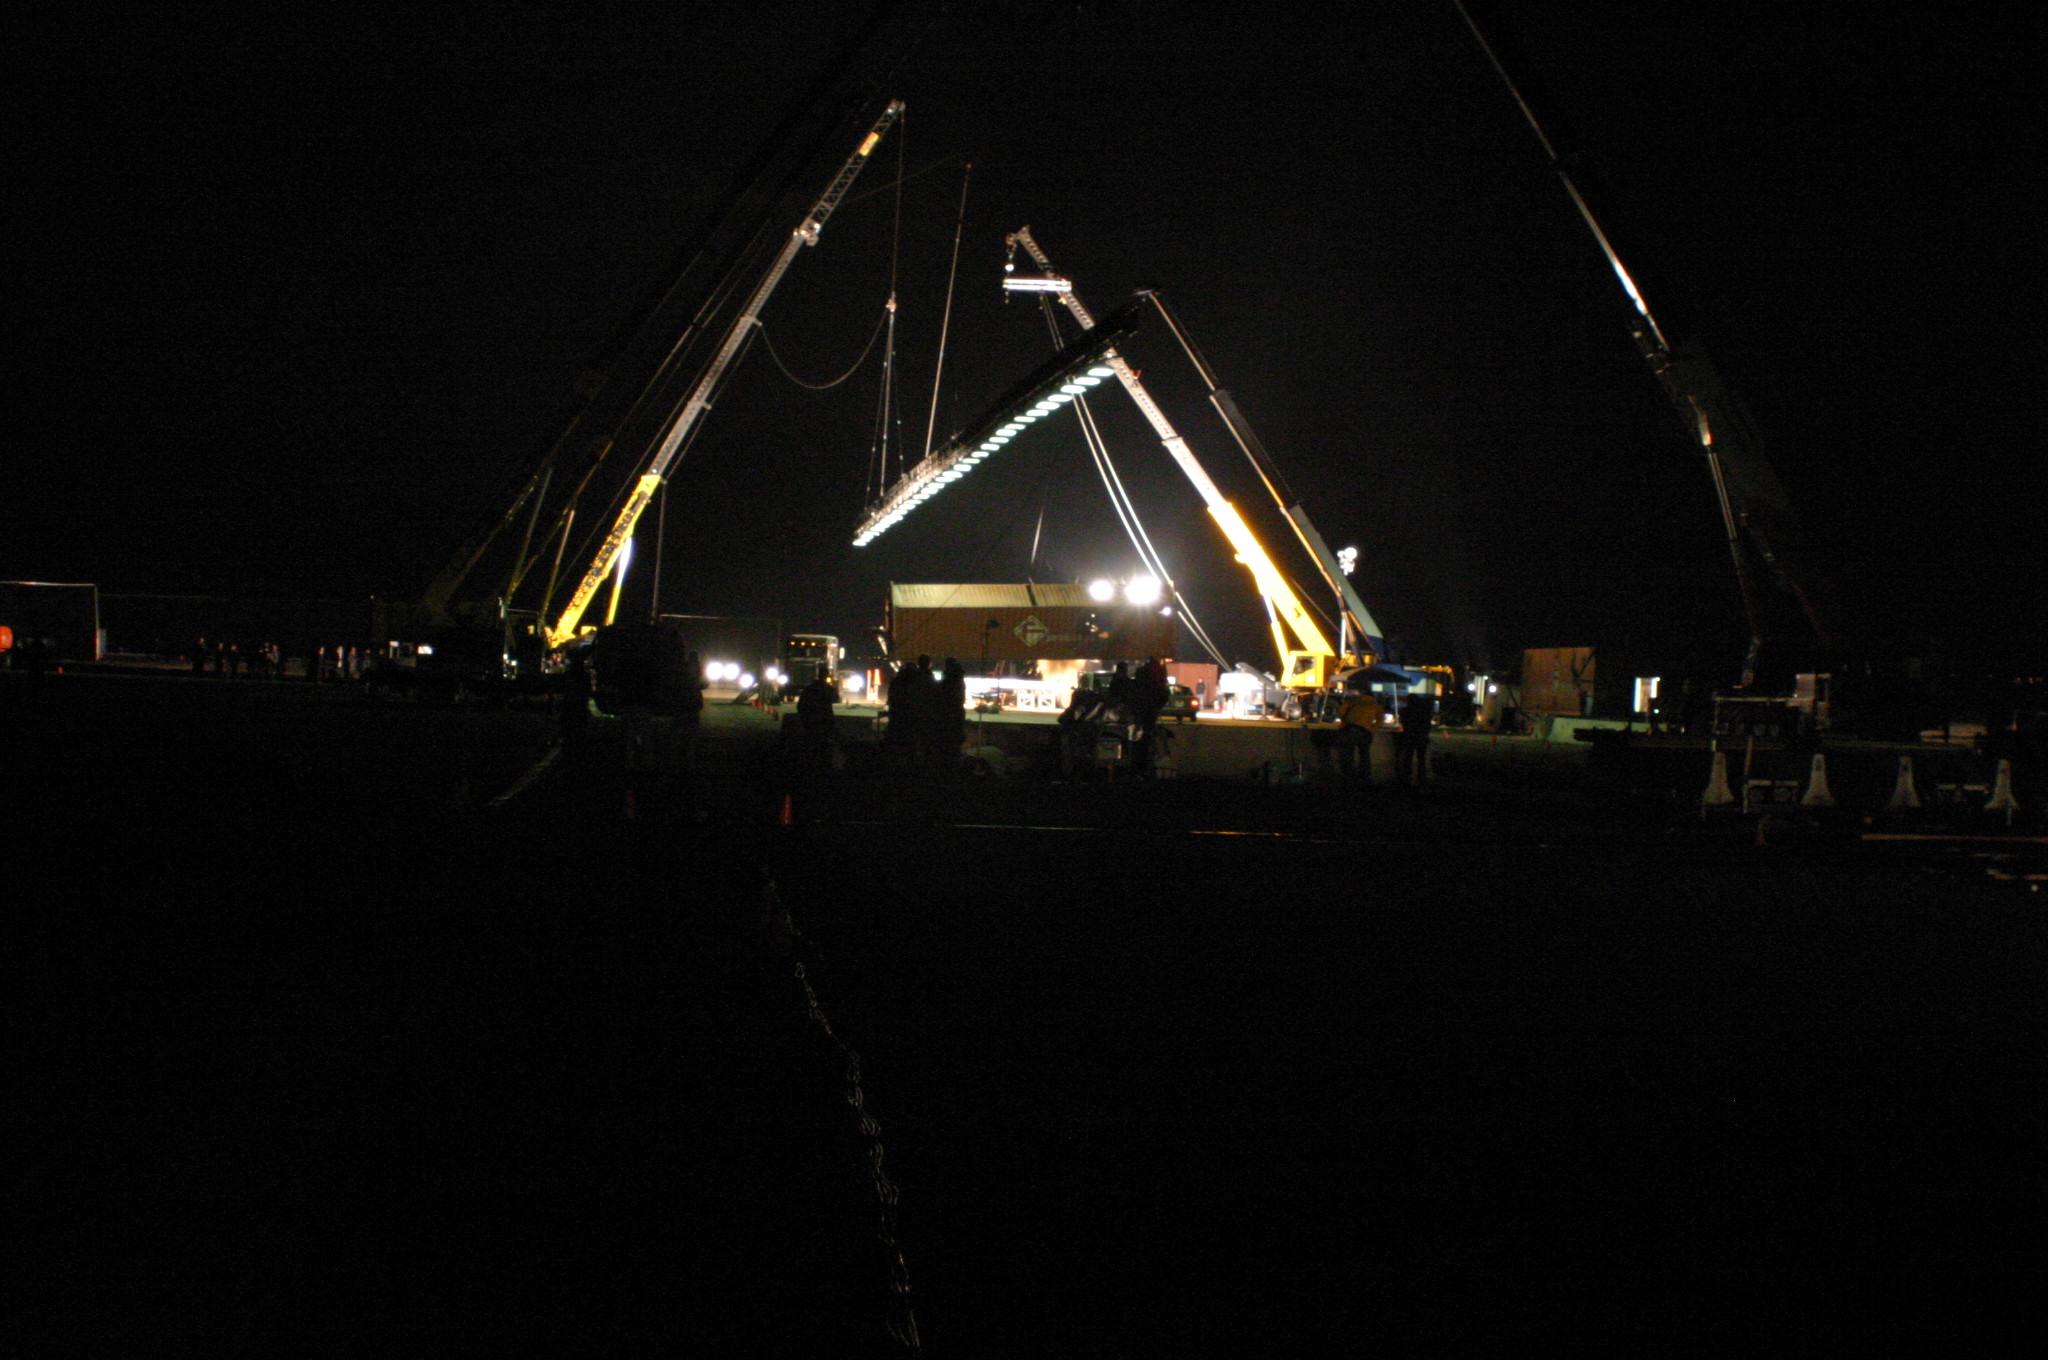 Tustin Rig event #2 at night. (Photo by Kelly D. Clear)